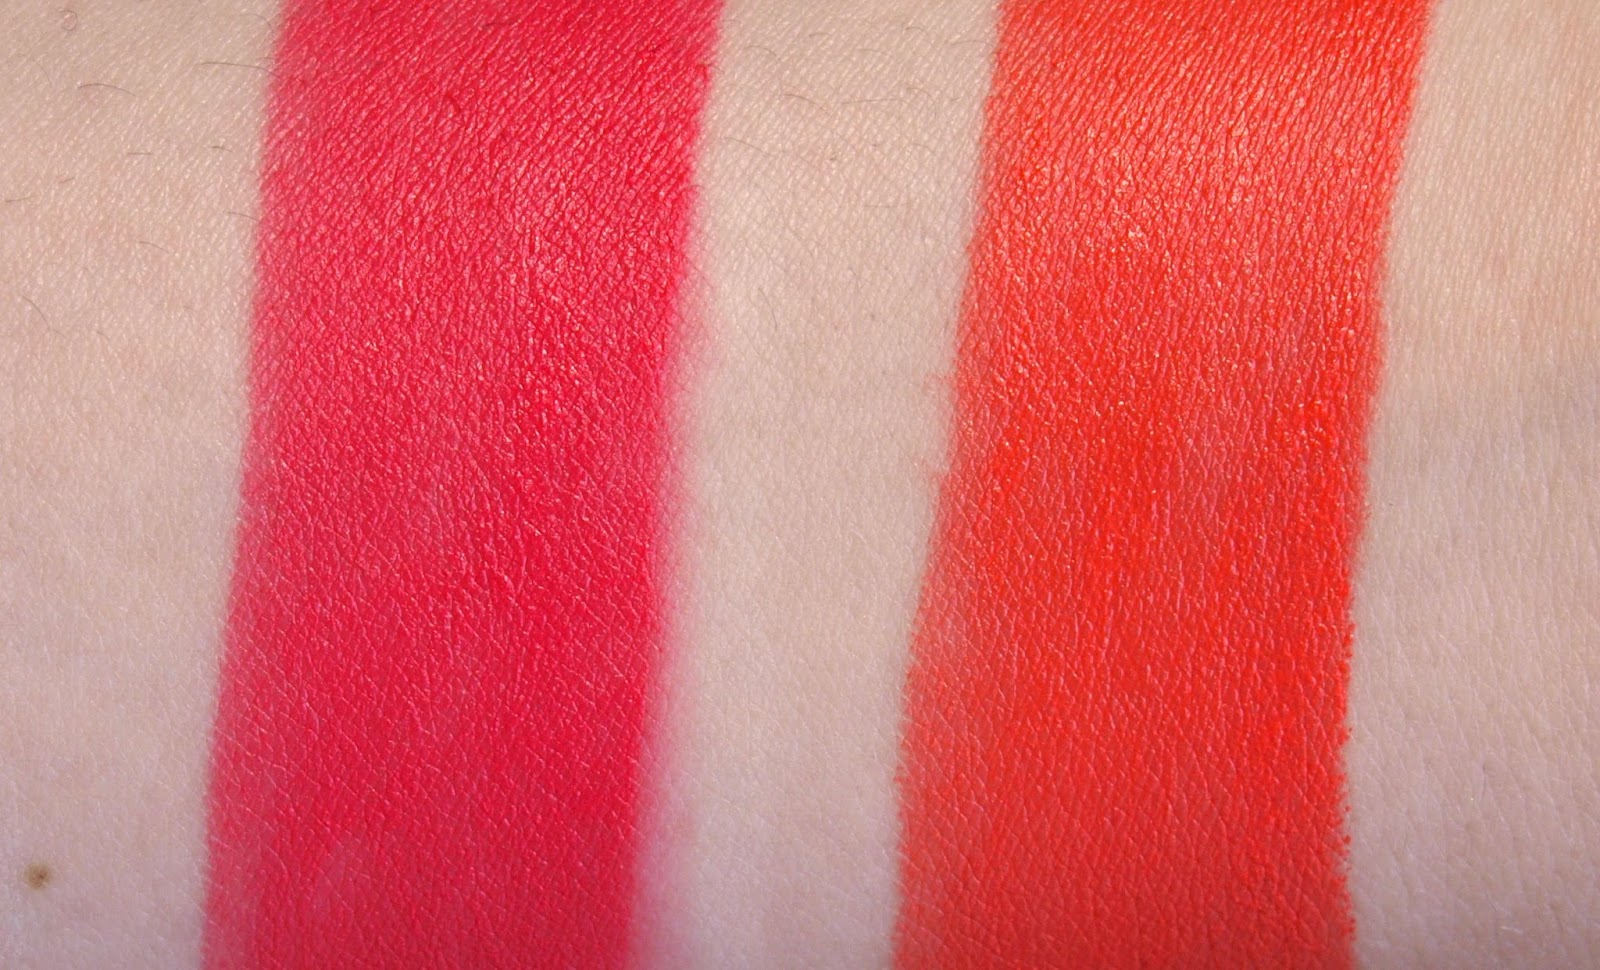 Revlon ColorBurst Matte Balm in "Unapologetic" swatches review